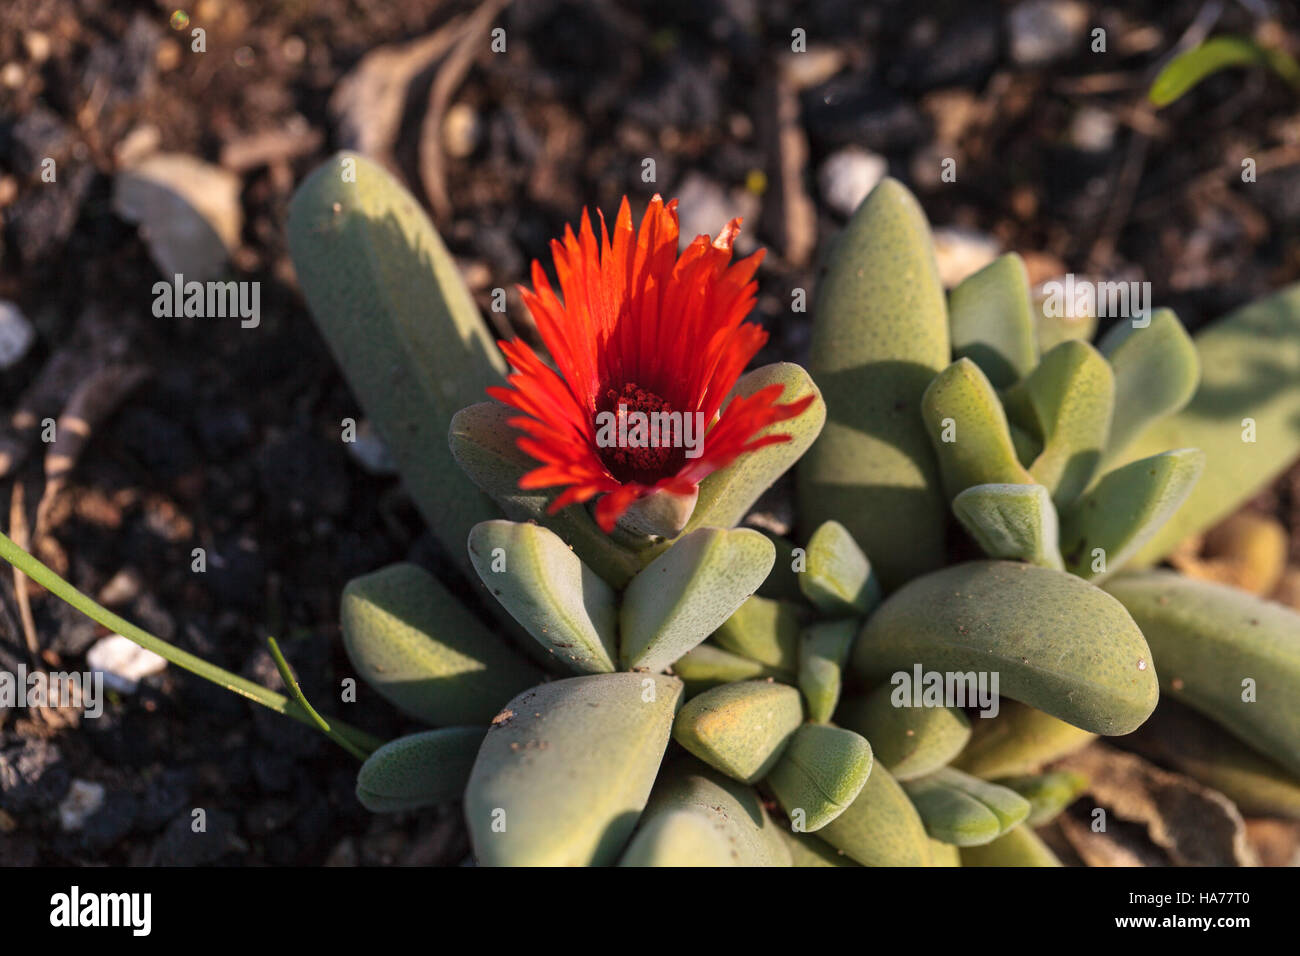 Bright red flower on a Cheiridopsis speciosa cactus called sunset glow blooms in a botanical garden Stock Photo